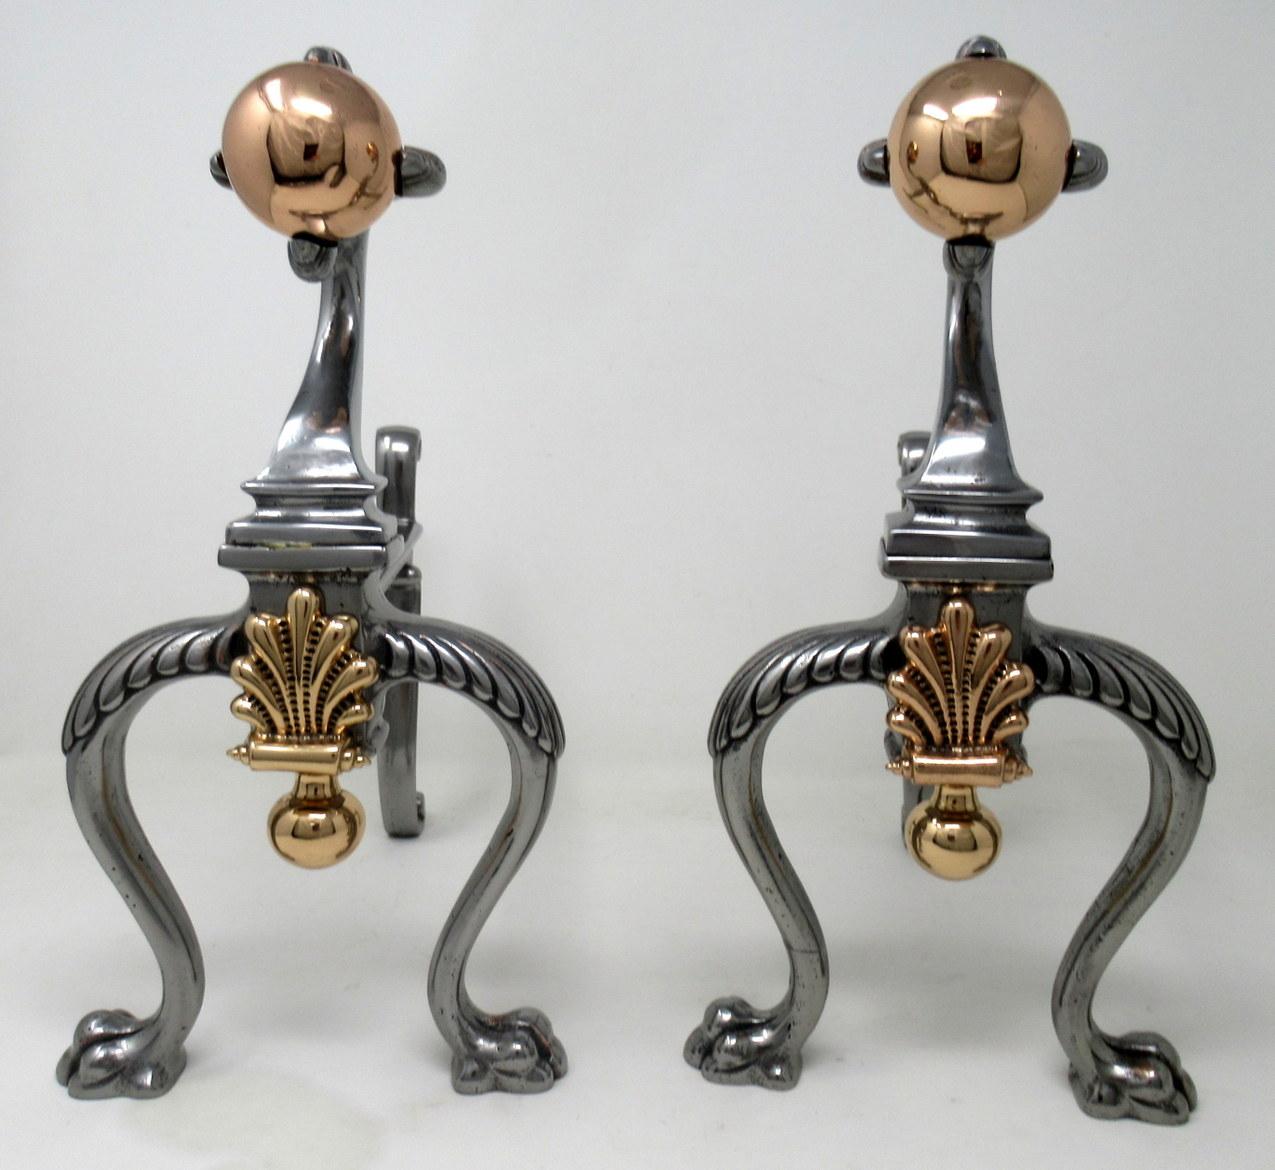 A stylish example of an early Victorian Country House style identical pair of heavy duty burnished steel and polished copper fire dogs, chenets or andirons of unusually large proportions, mid-19th century, possibly earlier of English or French